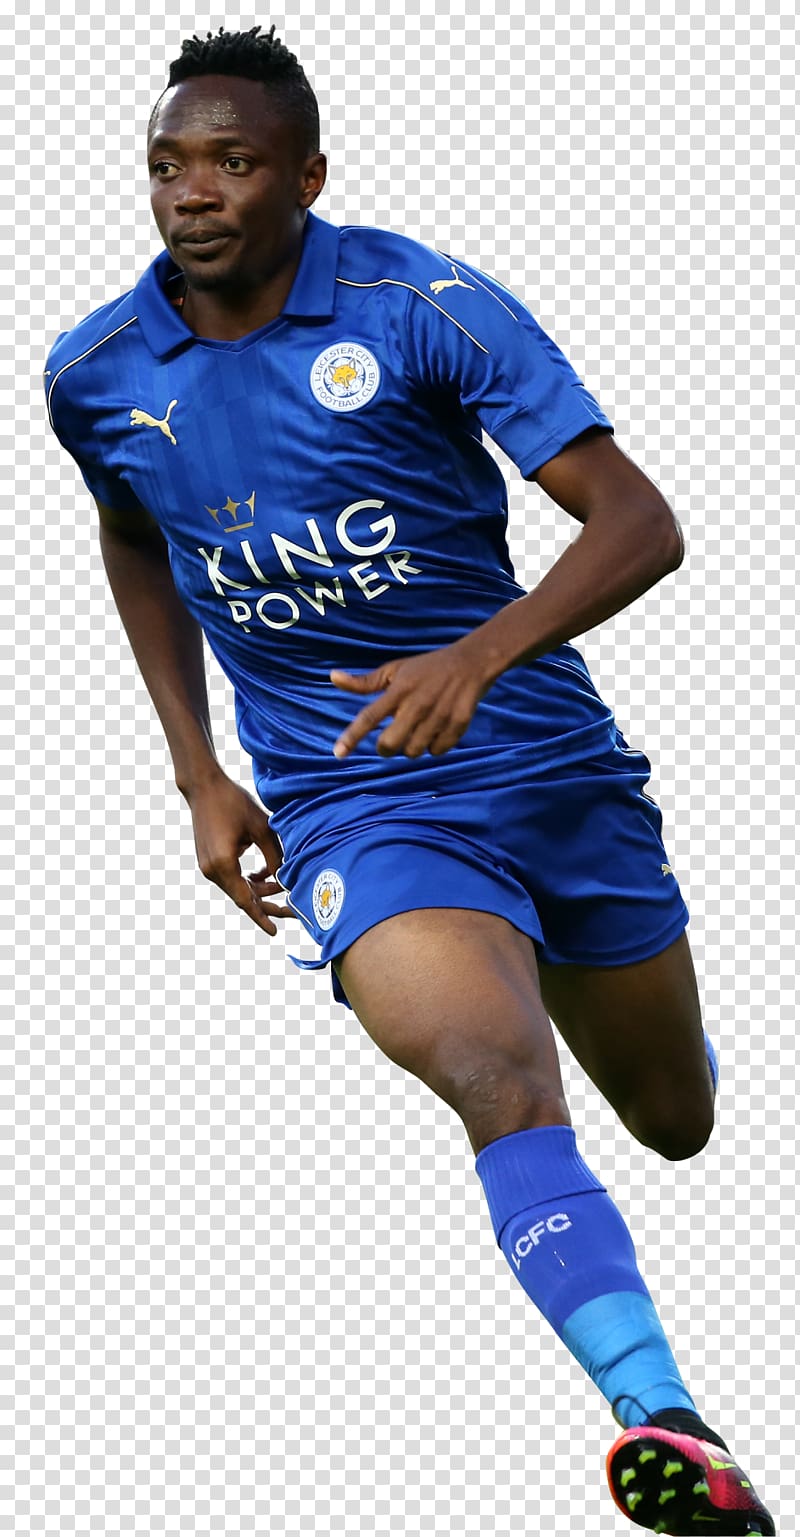 Ahmed Musa Leicester City F.C. Nigeria national football team Jersey Football player, ahmed transparent background PNG clipart